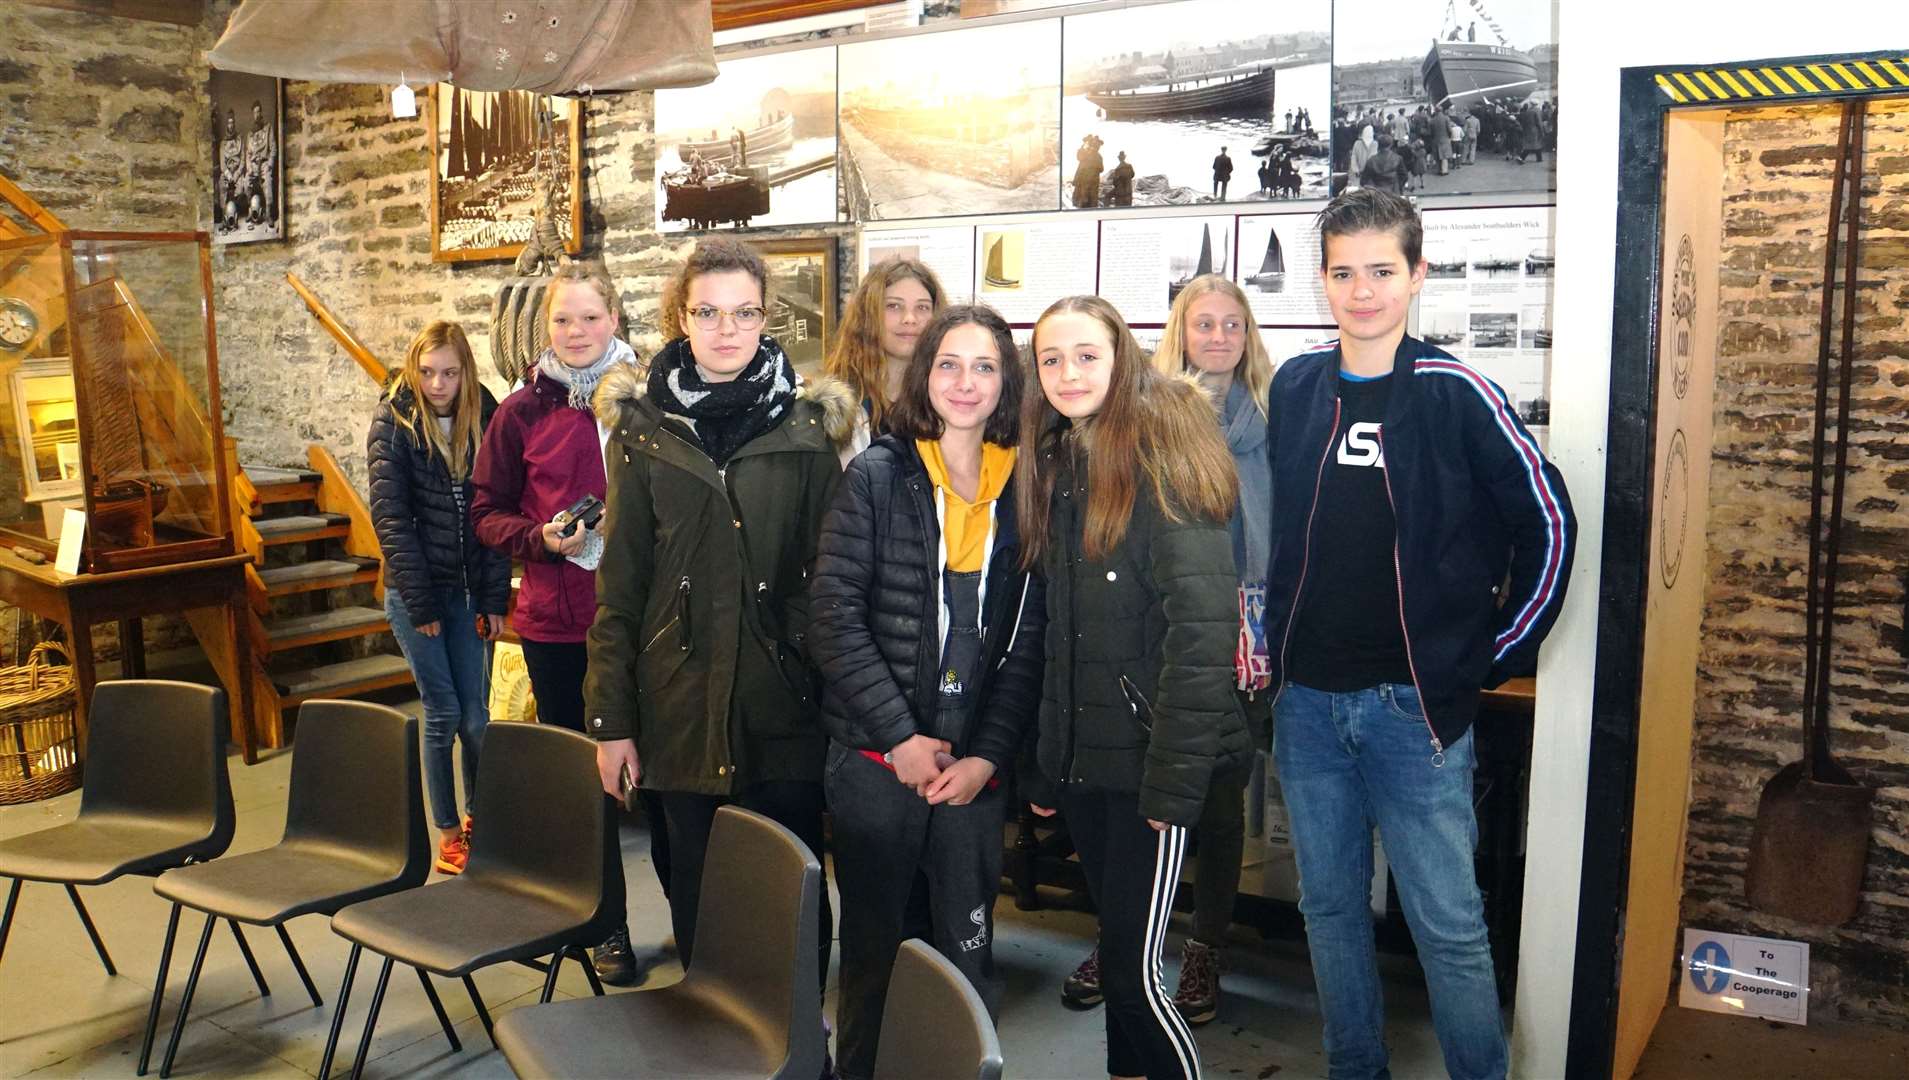 Some of the exchange students staying in and around Golspie who visited Wick.